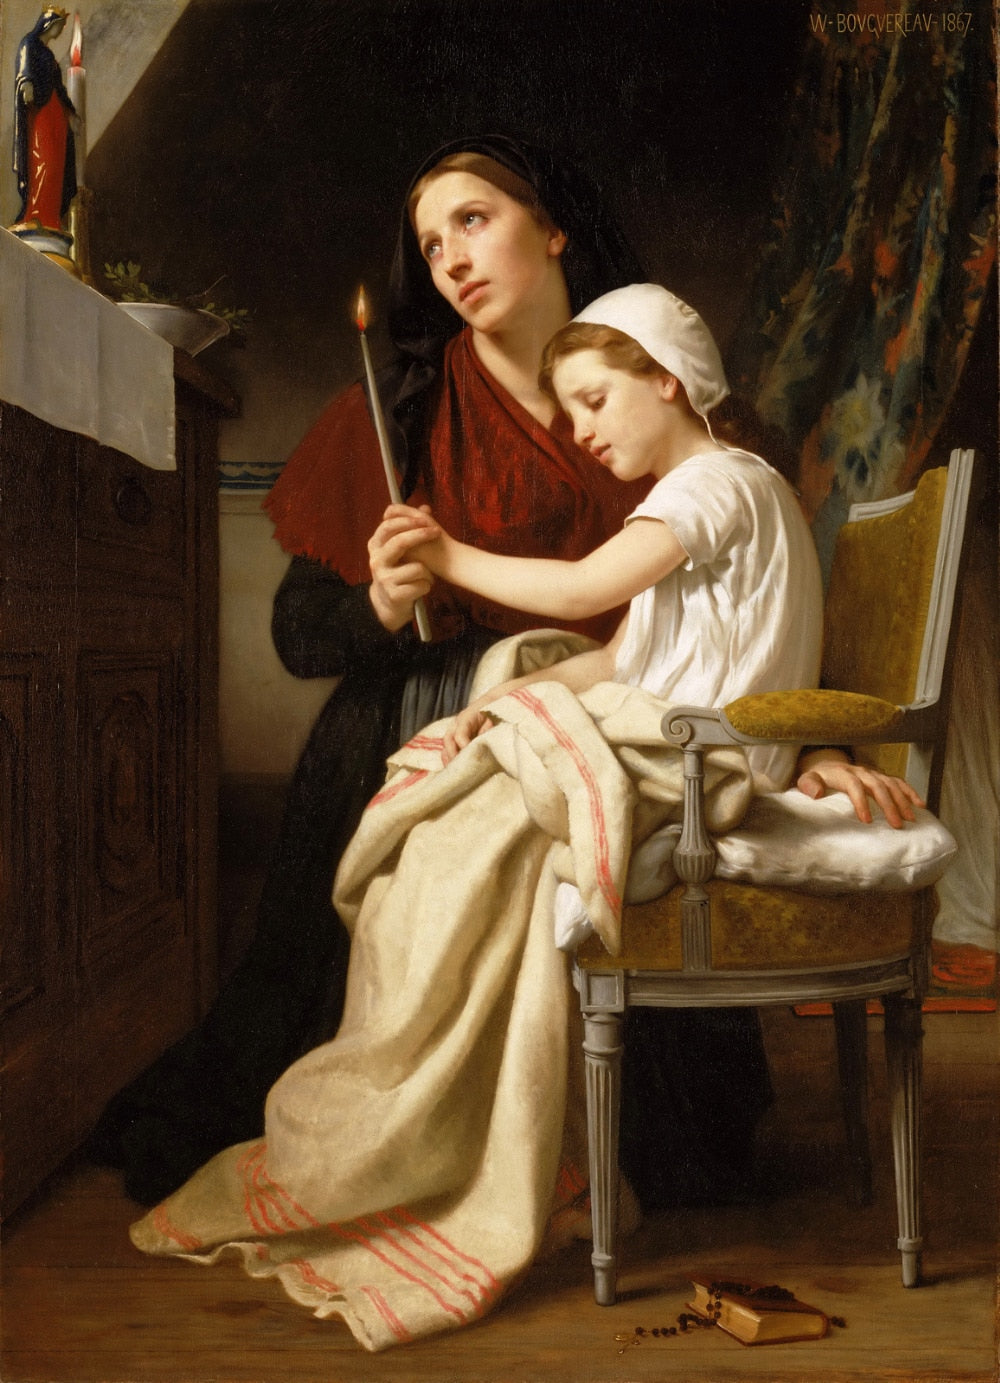 Handmade Oil painting reproduction An Offering of Thanks by William Bouguereau